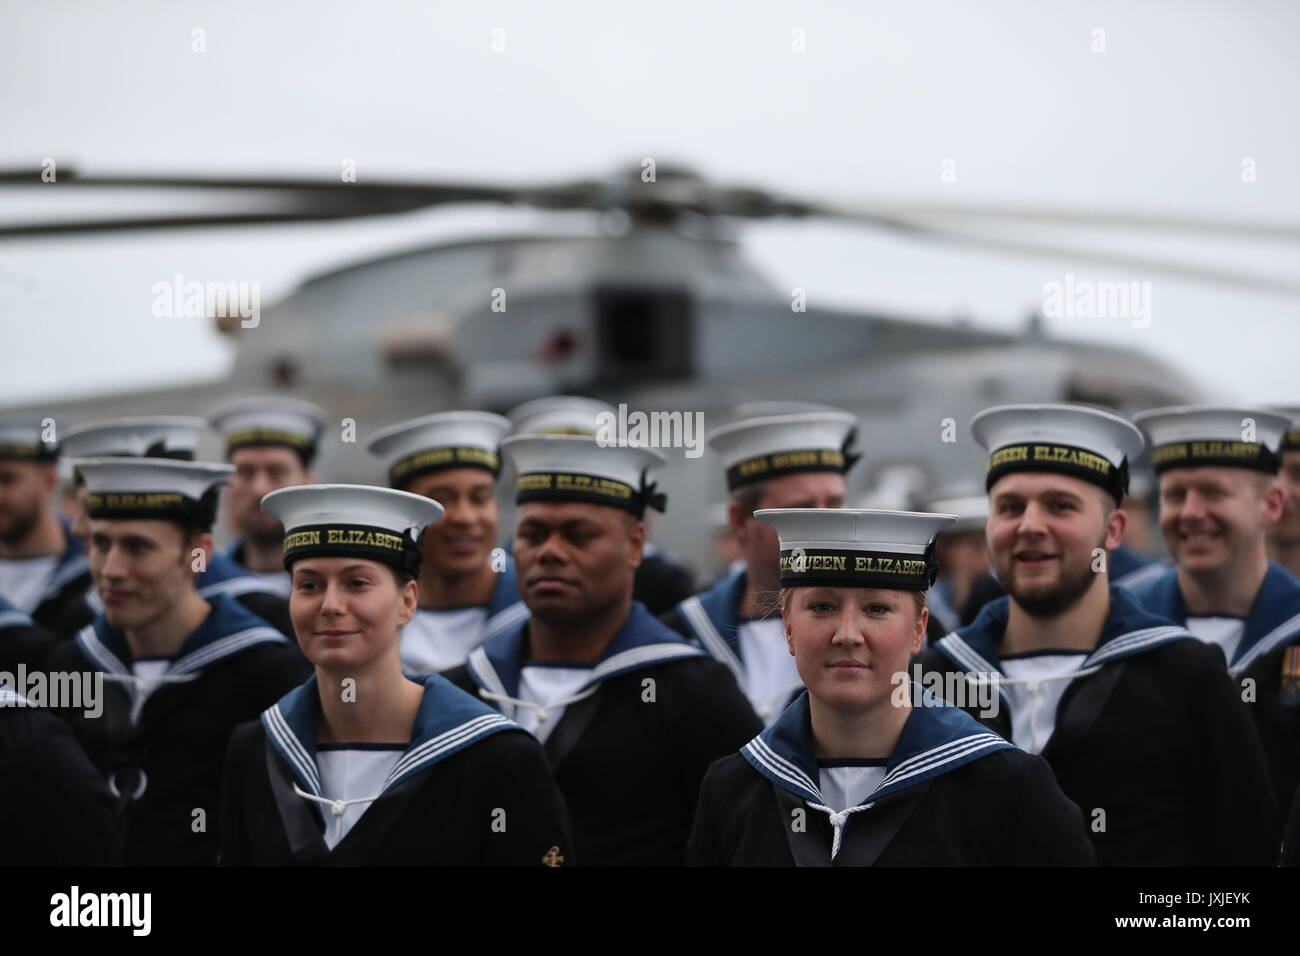 Members of the crew of HMS Queen Elizabeth, the UK's newest aircraft carrier, muster on the deck ahead of the ship's arrival in Portsmouth. Stock Photo